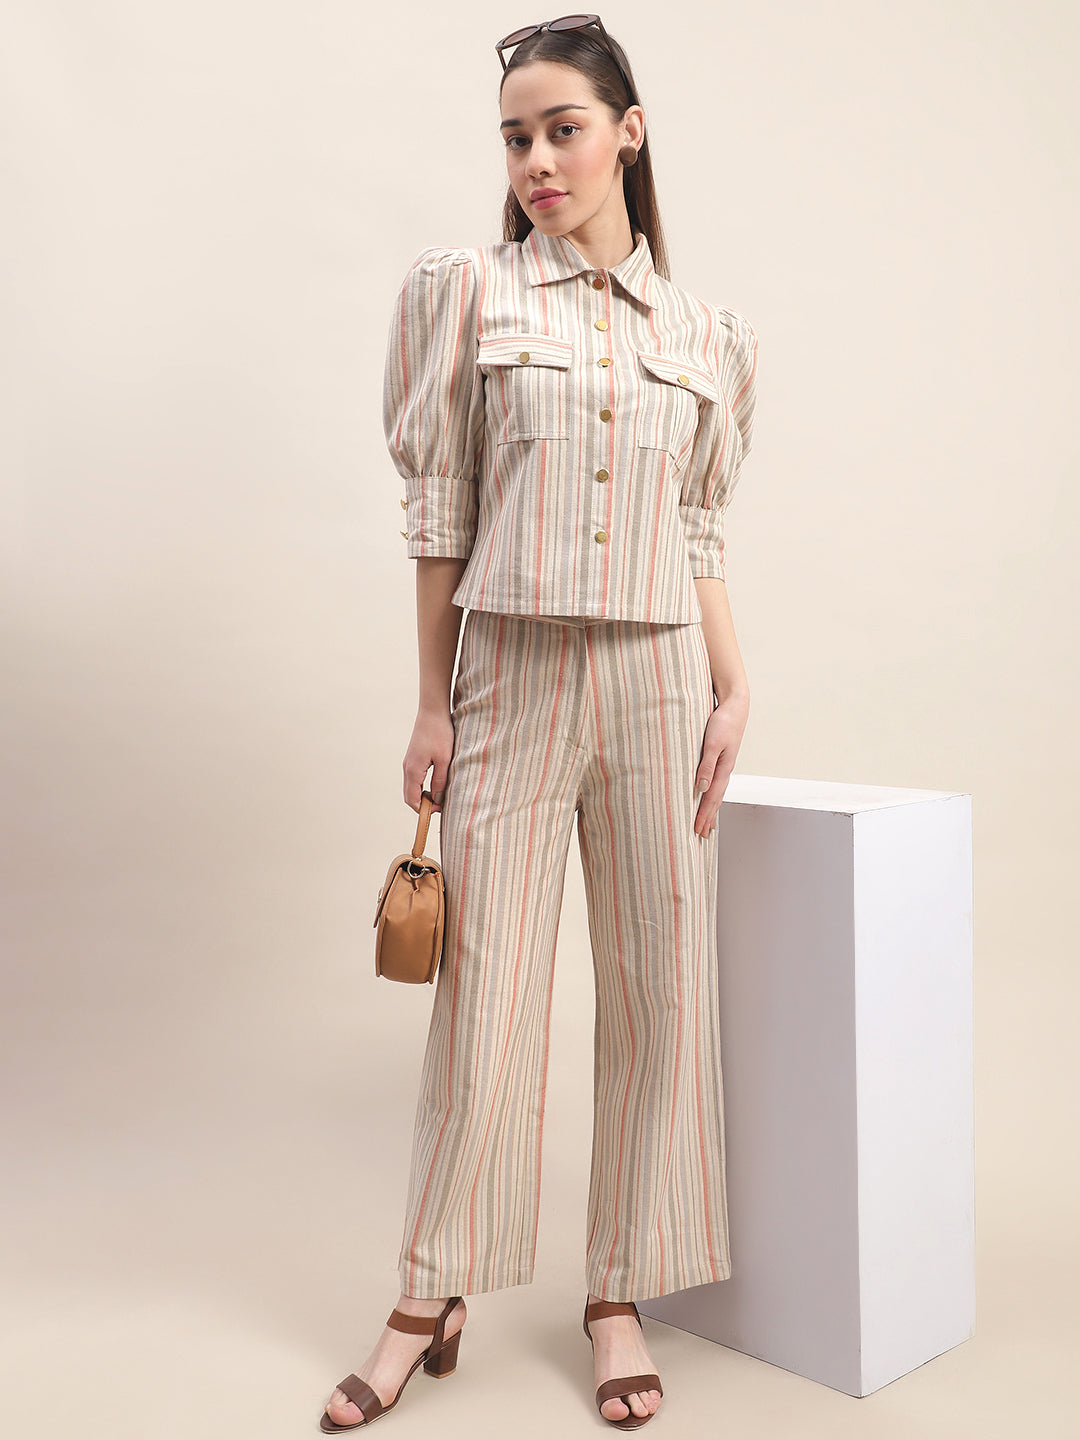 Beige Co-Ord Set With Multicolored Stripes